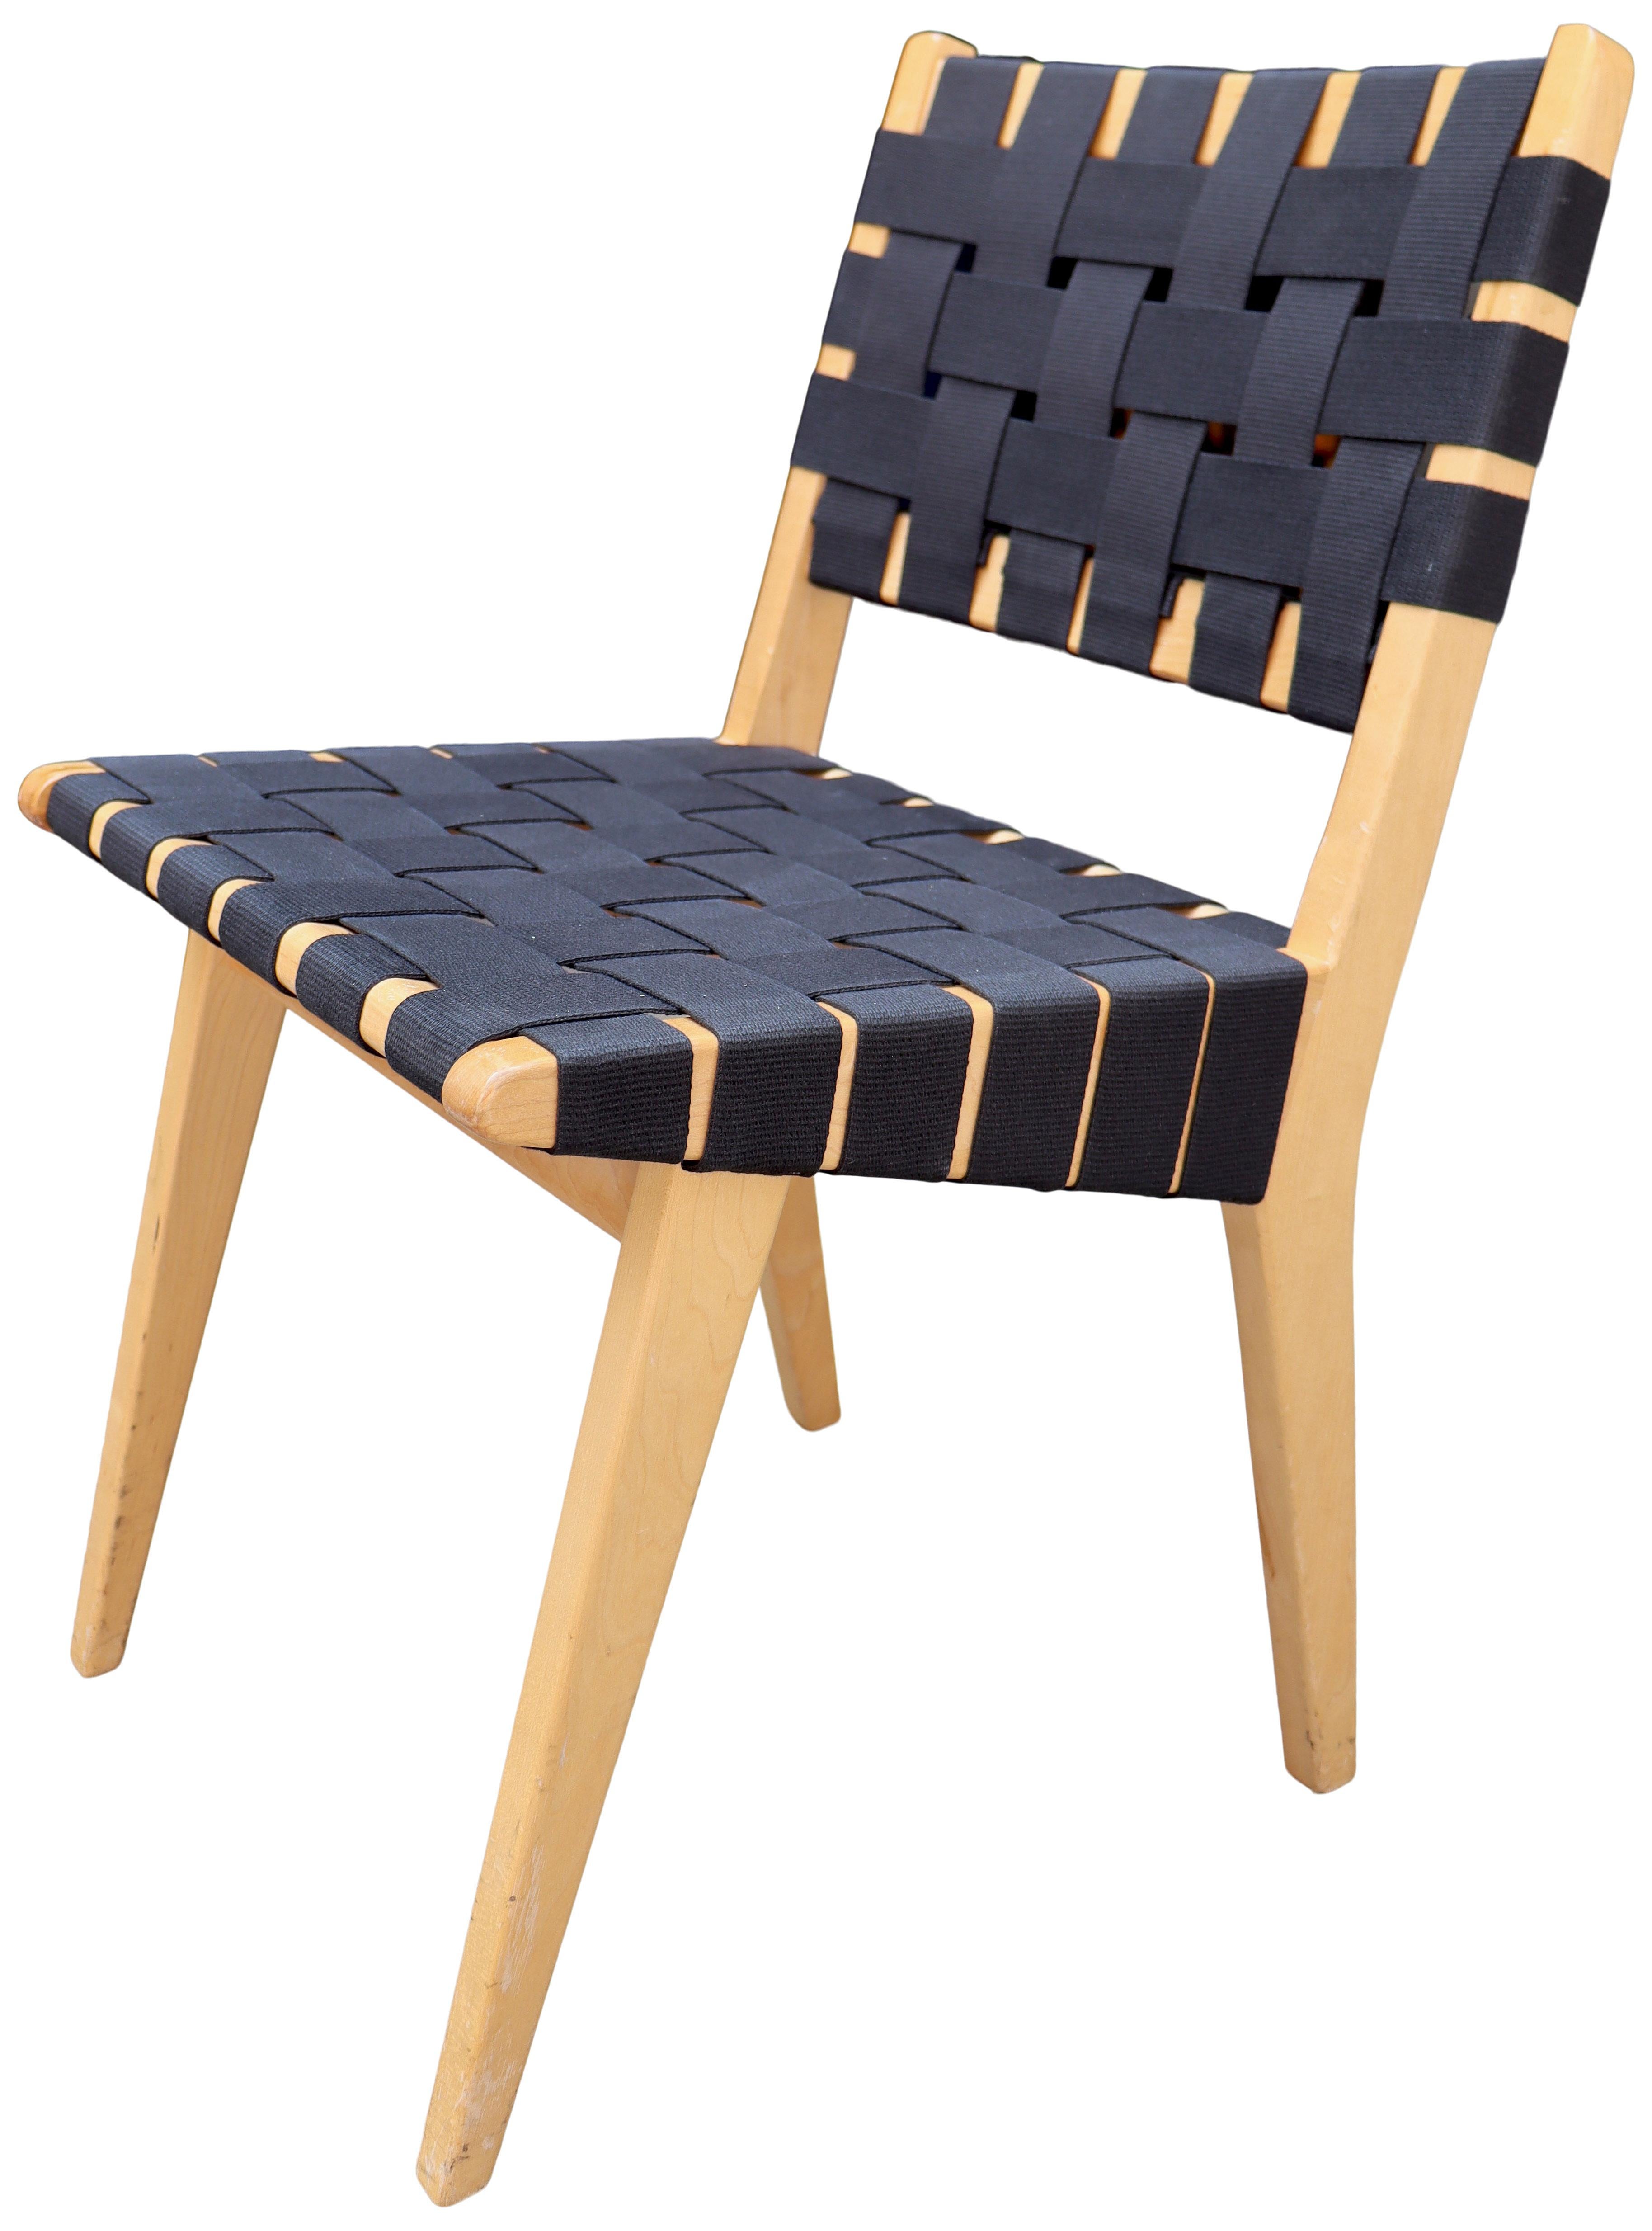 Simple classic and honest design made this side or dining chair so popular that its still in production today. Made from solid maple wood and black cotton strapping. A classic midcentury design that was first designed in 1942 was one of Knolls first